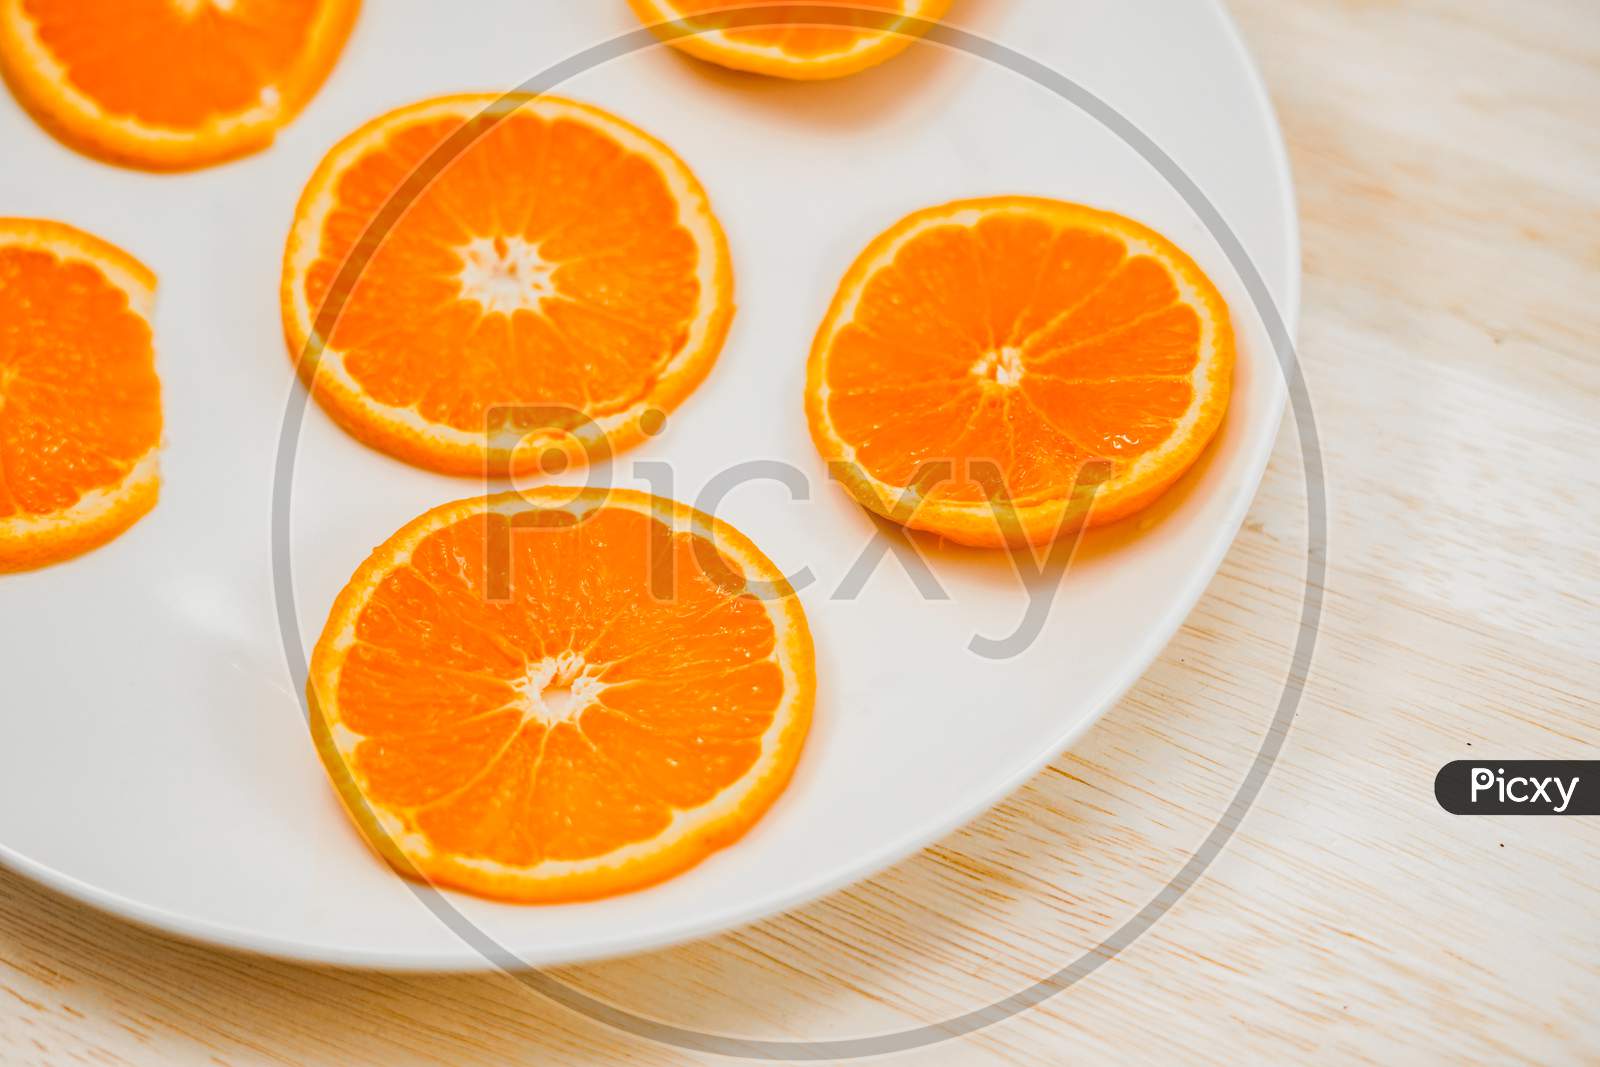 Orange Of The Image That Has Been Placed In The Dish